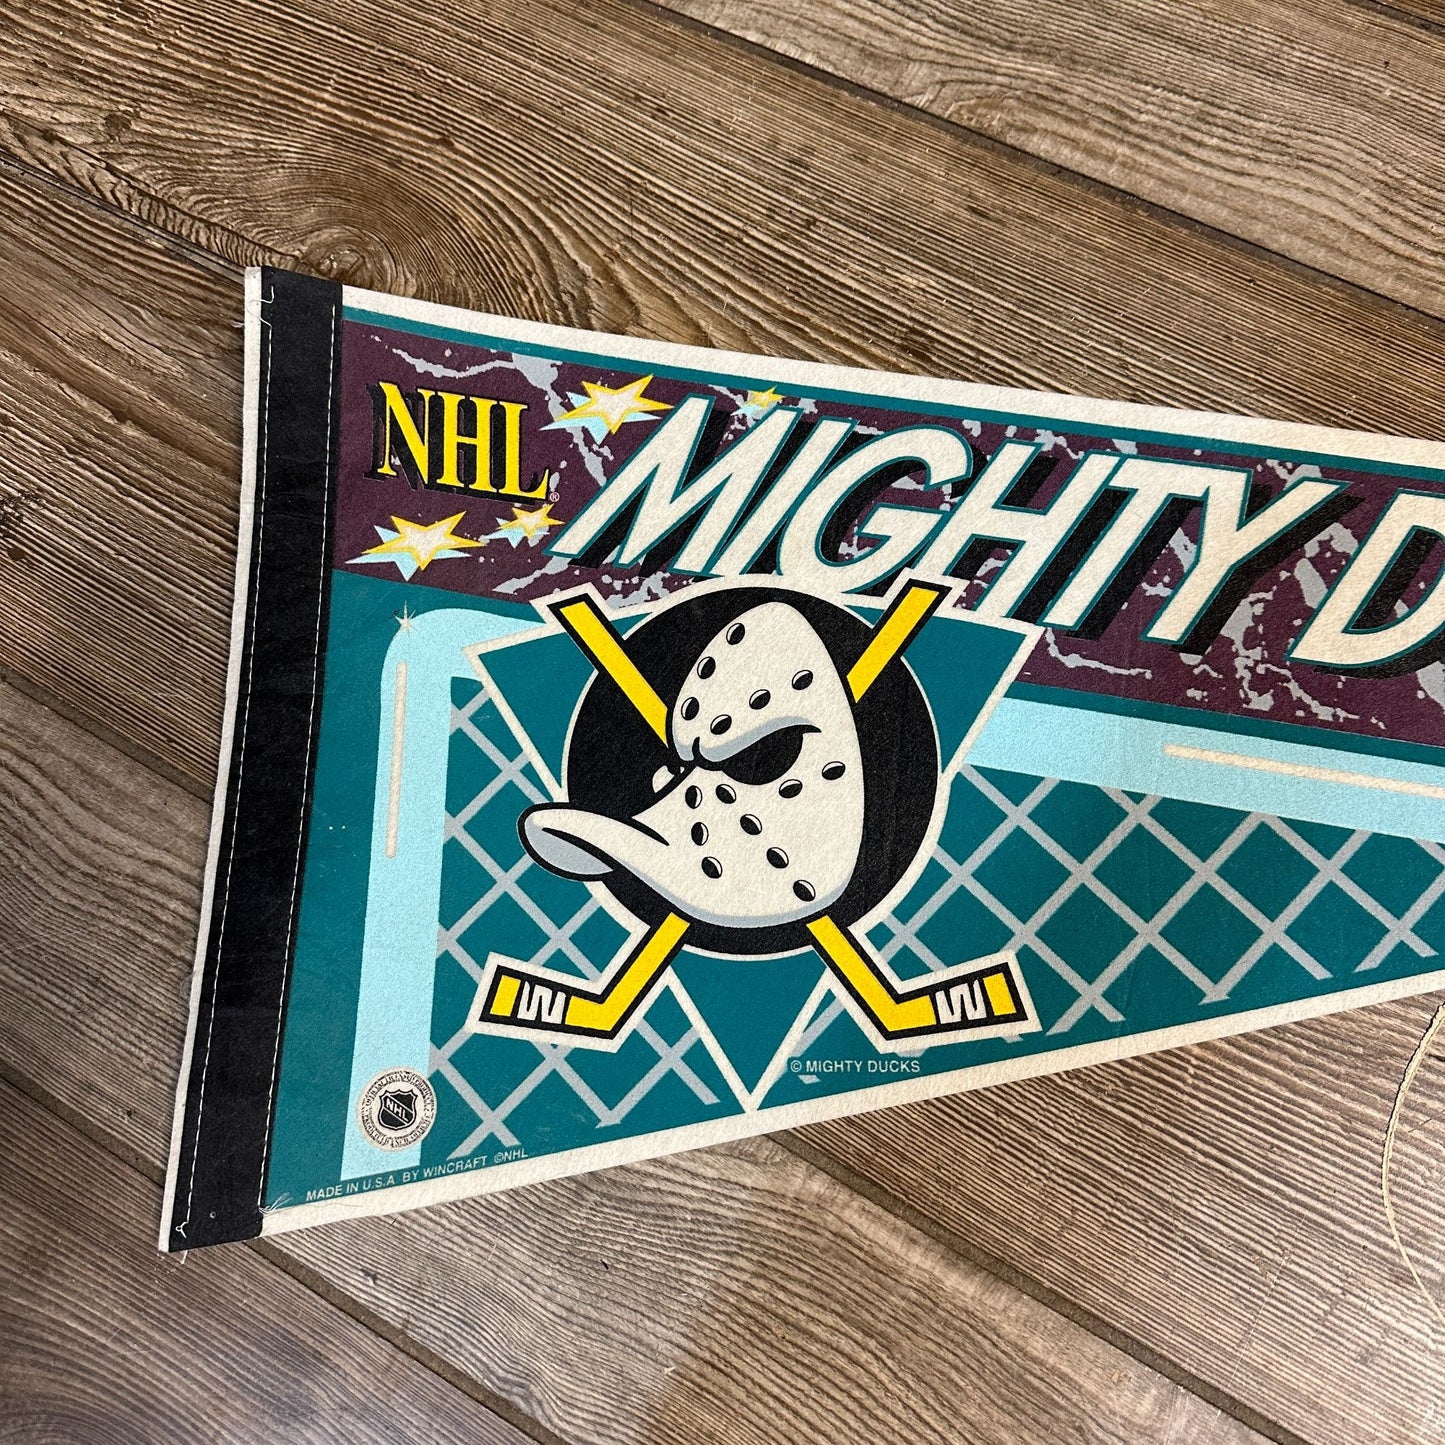 NHL MIGHTY DUCKS VINTAGE 90S HOCKEY SPORTS PENNANT WINCRAFT MADE IN USA